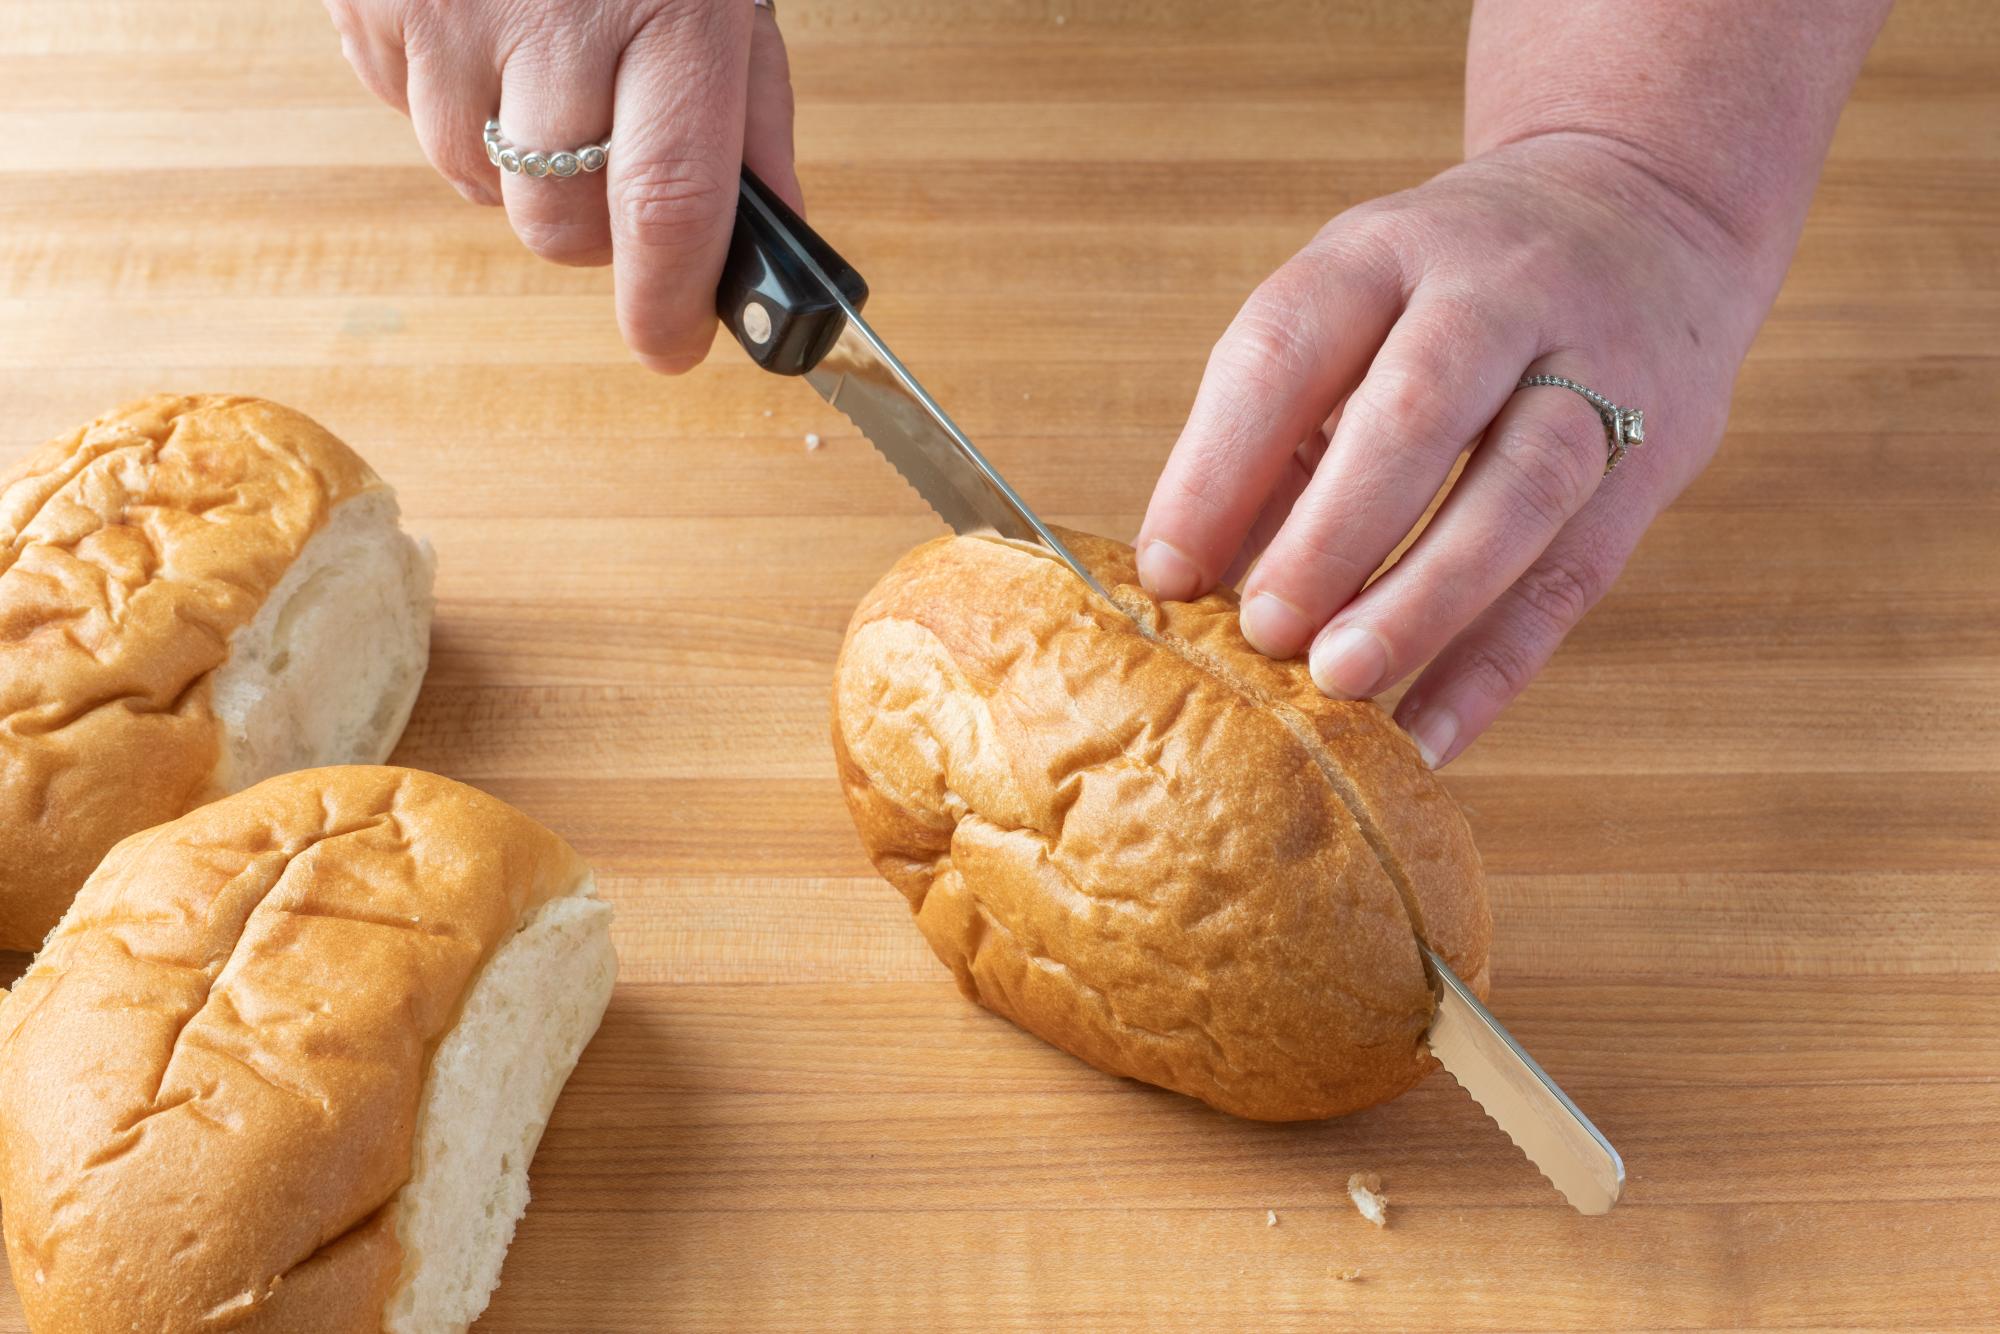 Slicing rolls in half with the Petite Slicer